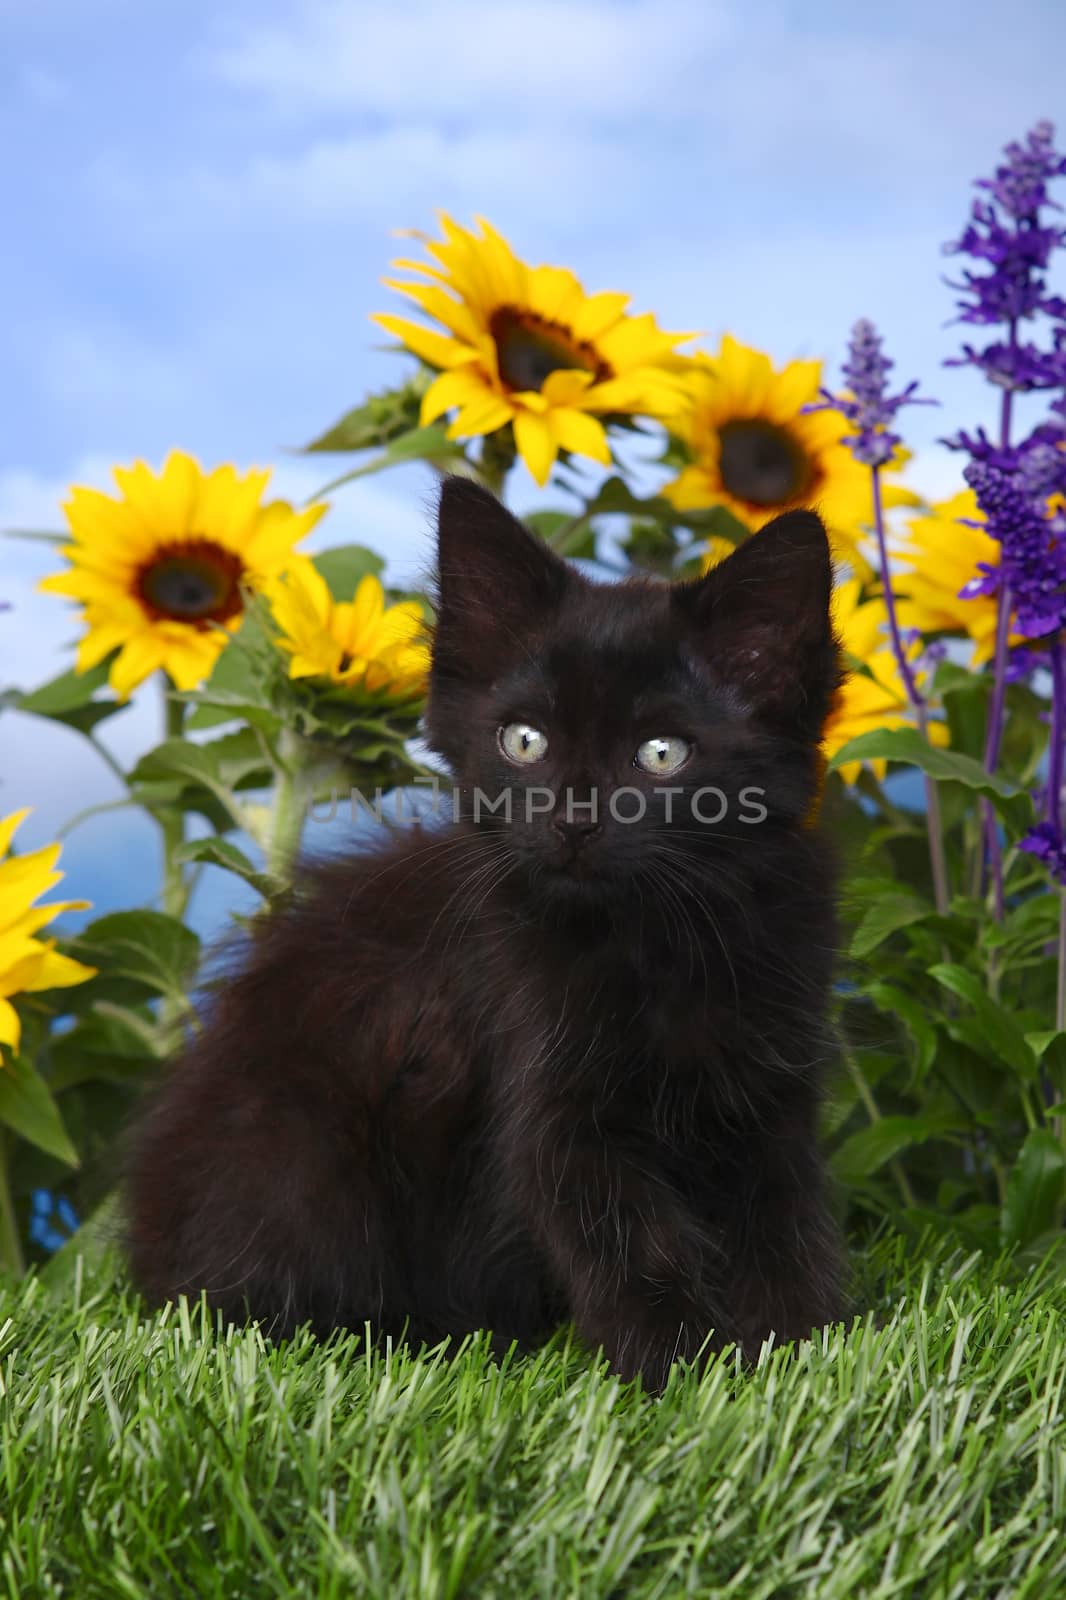 Cute Black Kitten in the Garden With Sunflowers and Salvia by tobkatrina